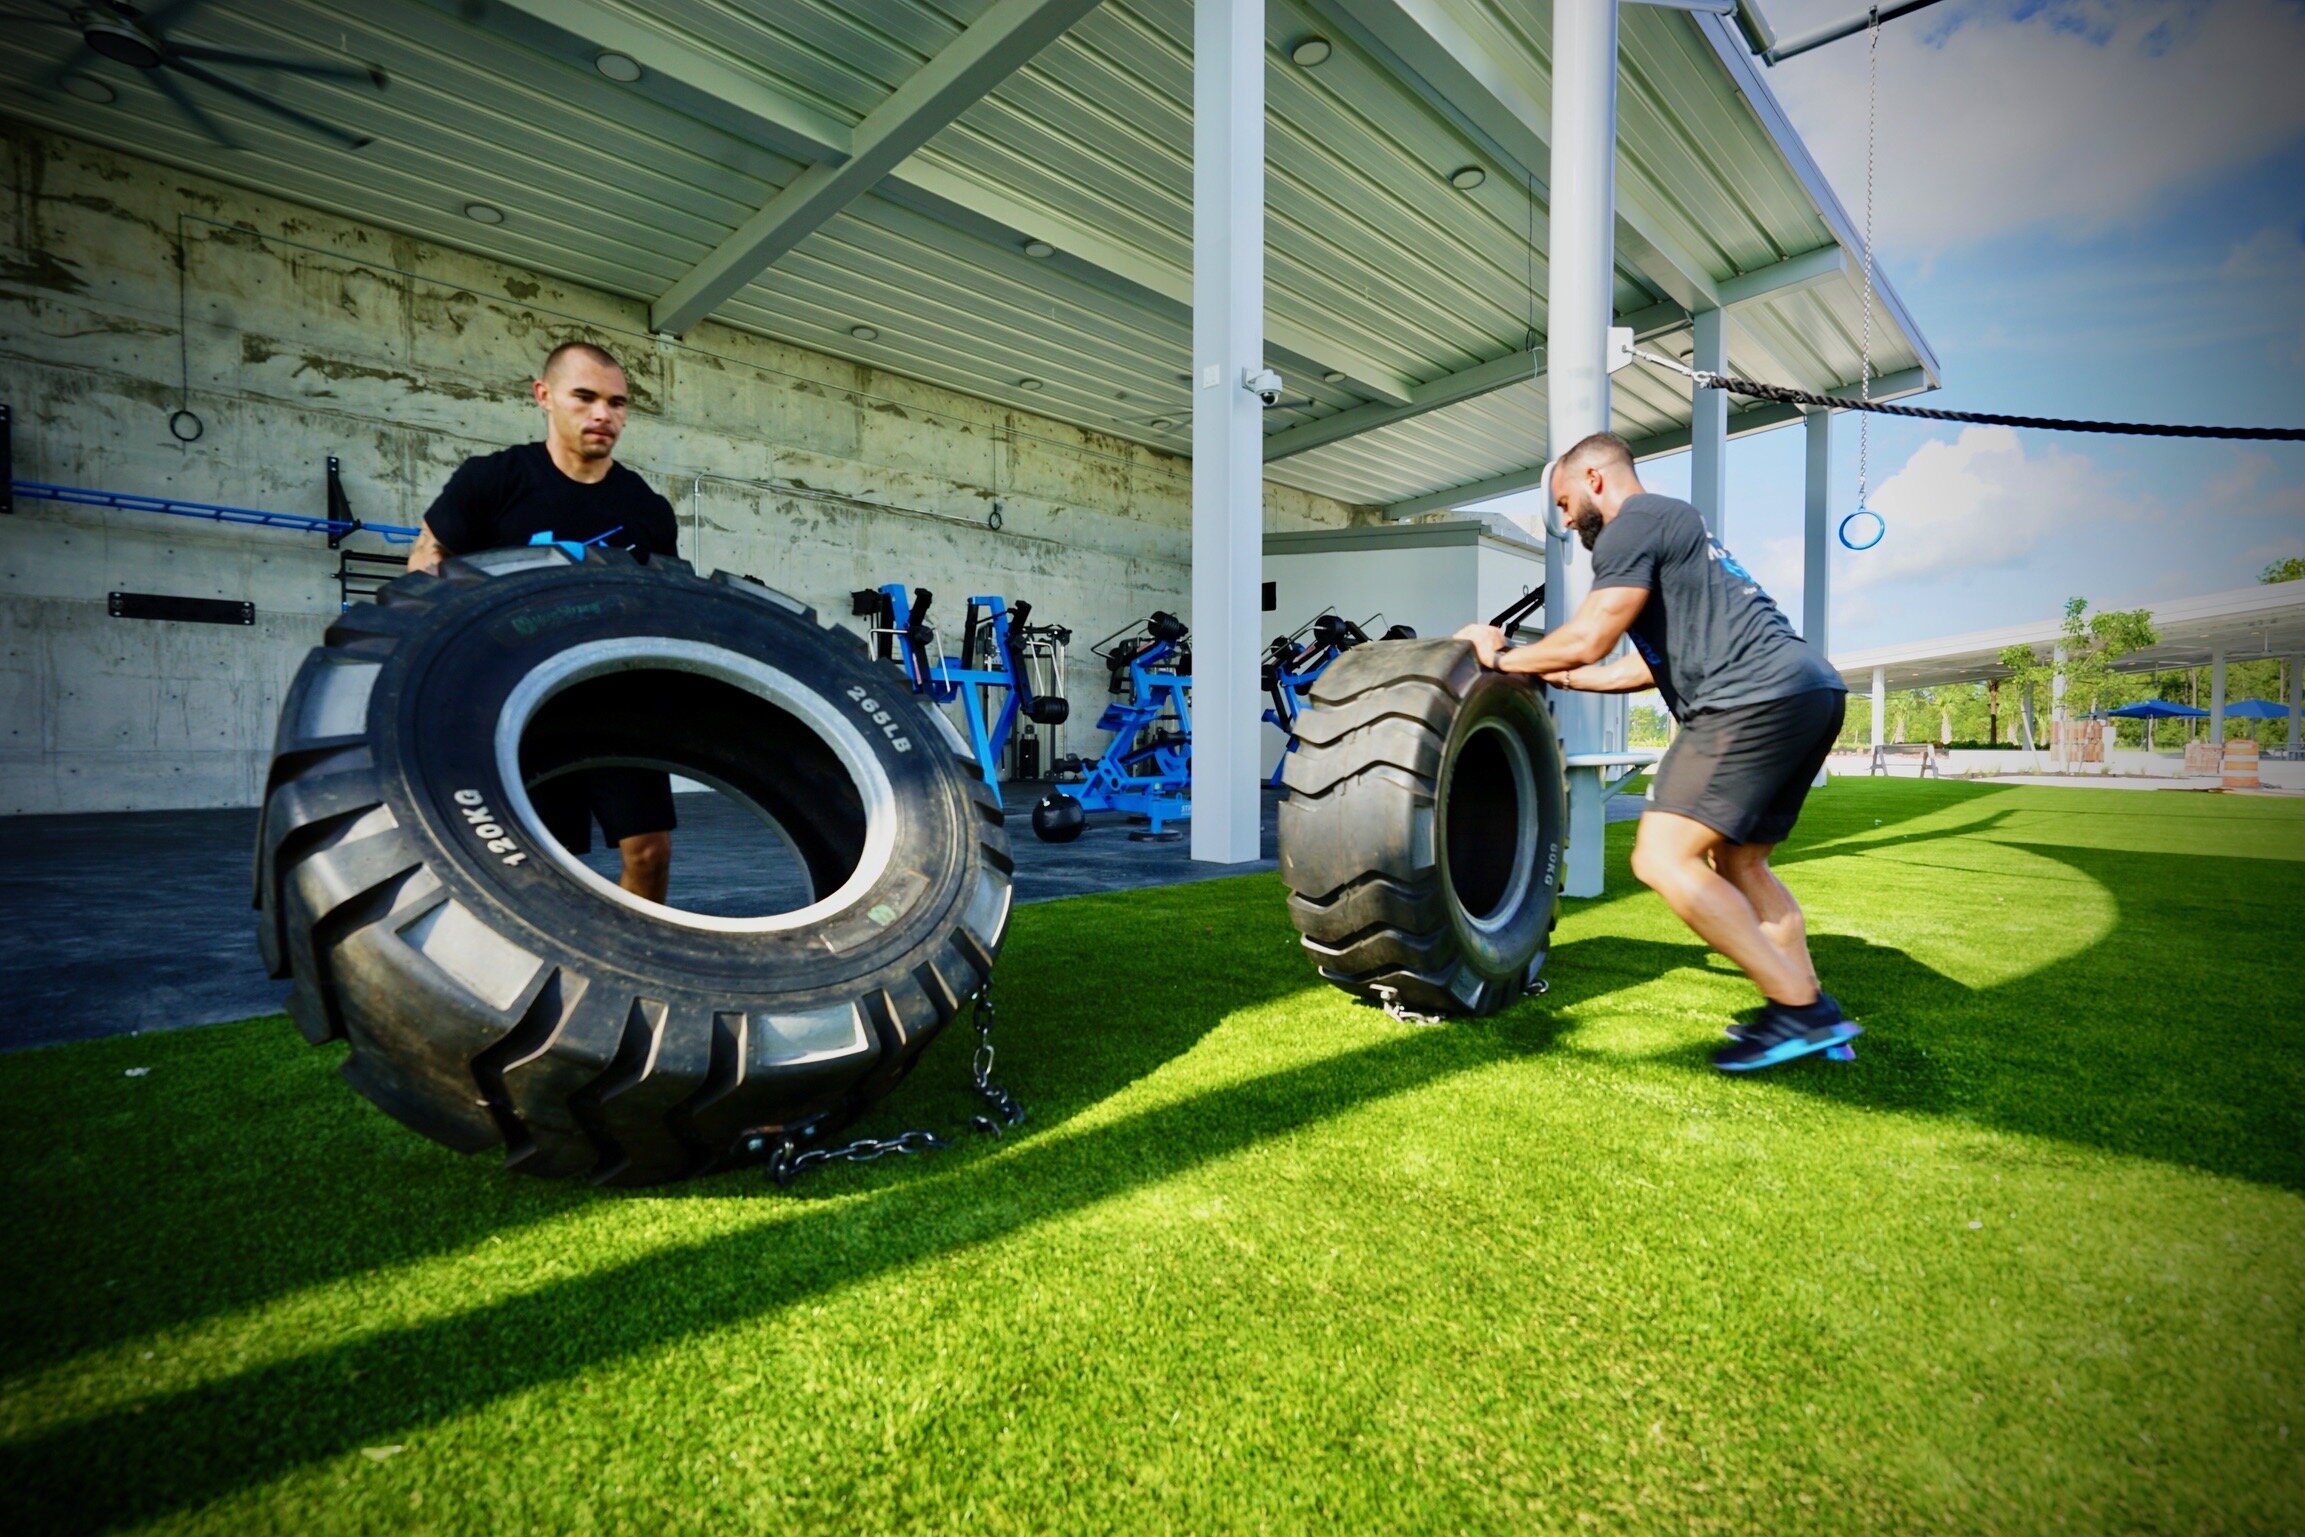 The Factory MoveStrong Tire Flipping